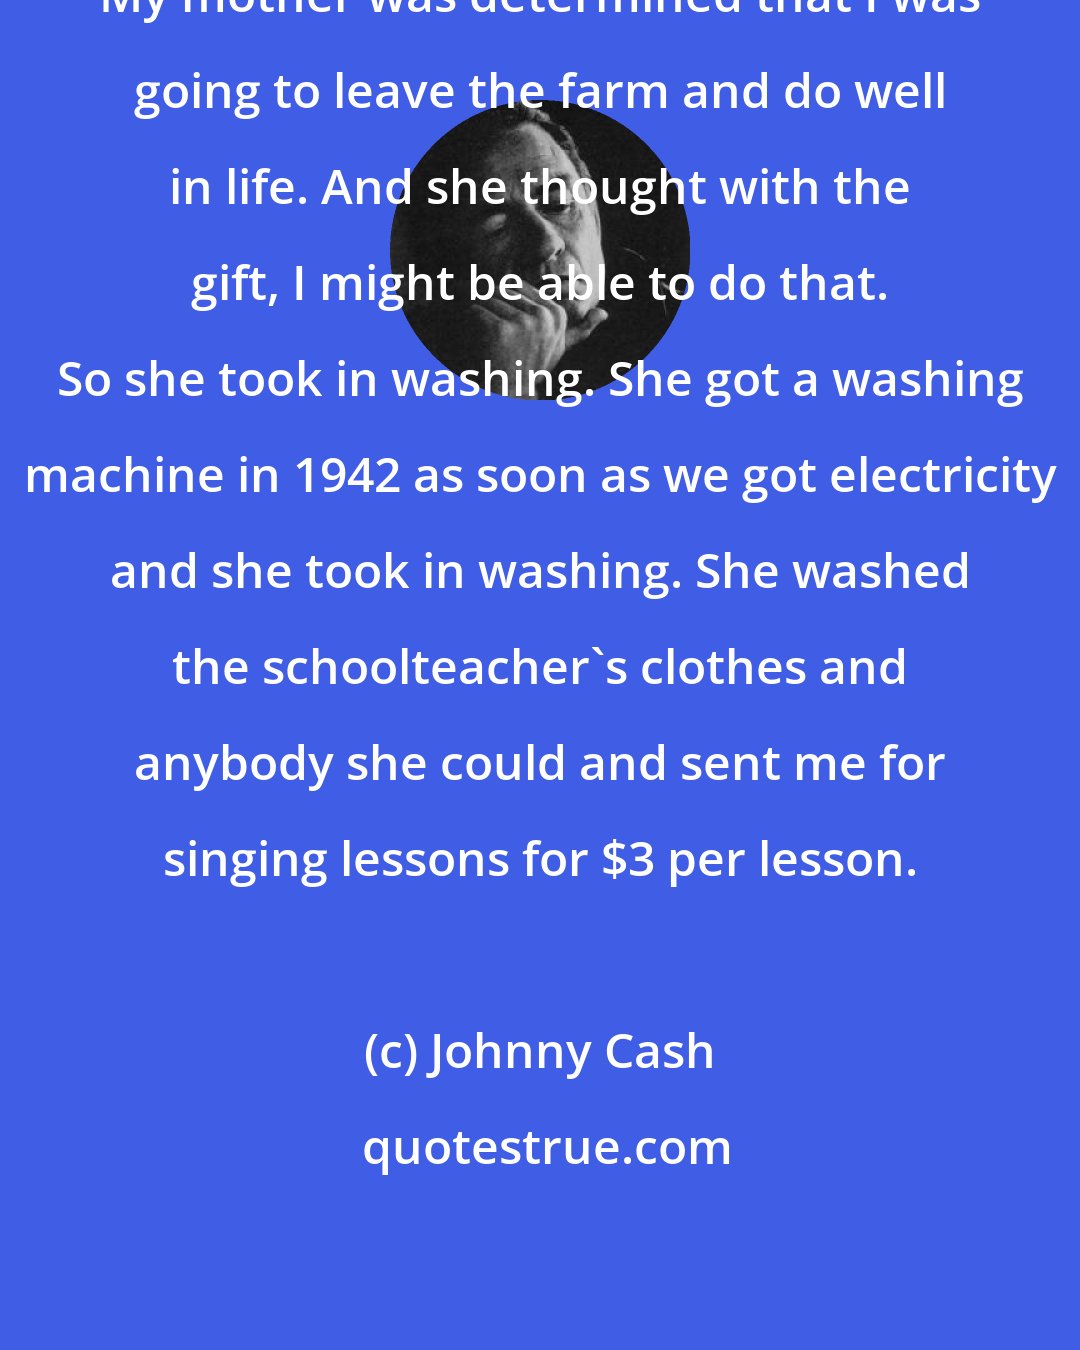 Johnny Cash: My mother was determined that I was going to leave the farm and do well in life. And she thought with the gift, I might be able to do that. So she took in washing. She got a washing machine in 1942 as soon as we got electricity and she took in washing. She washed the schoolteacher's clothes and anybody she could and sent me for singing lessons for $3 per lesson.